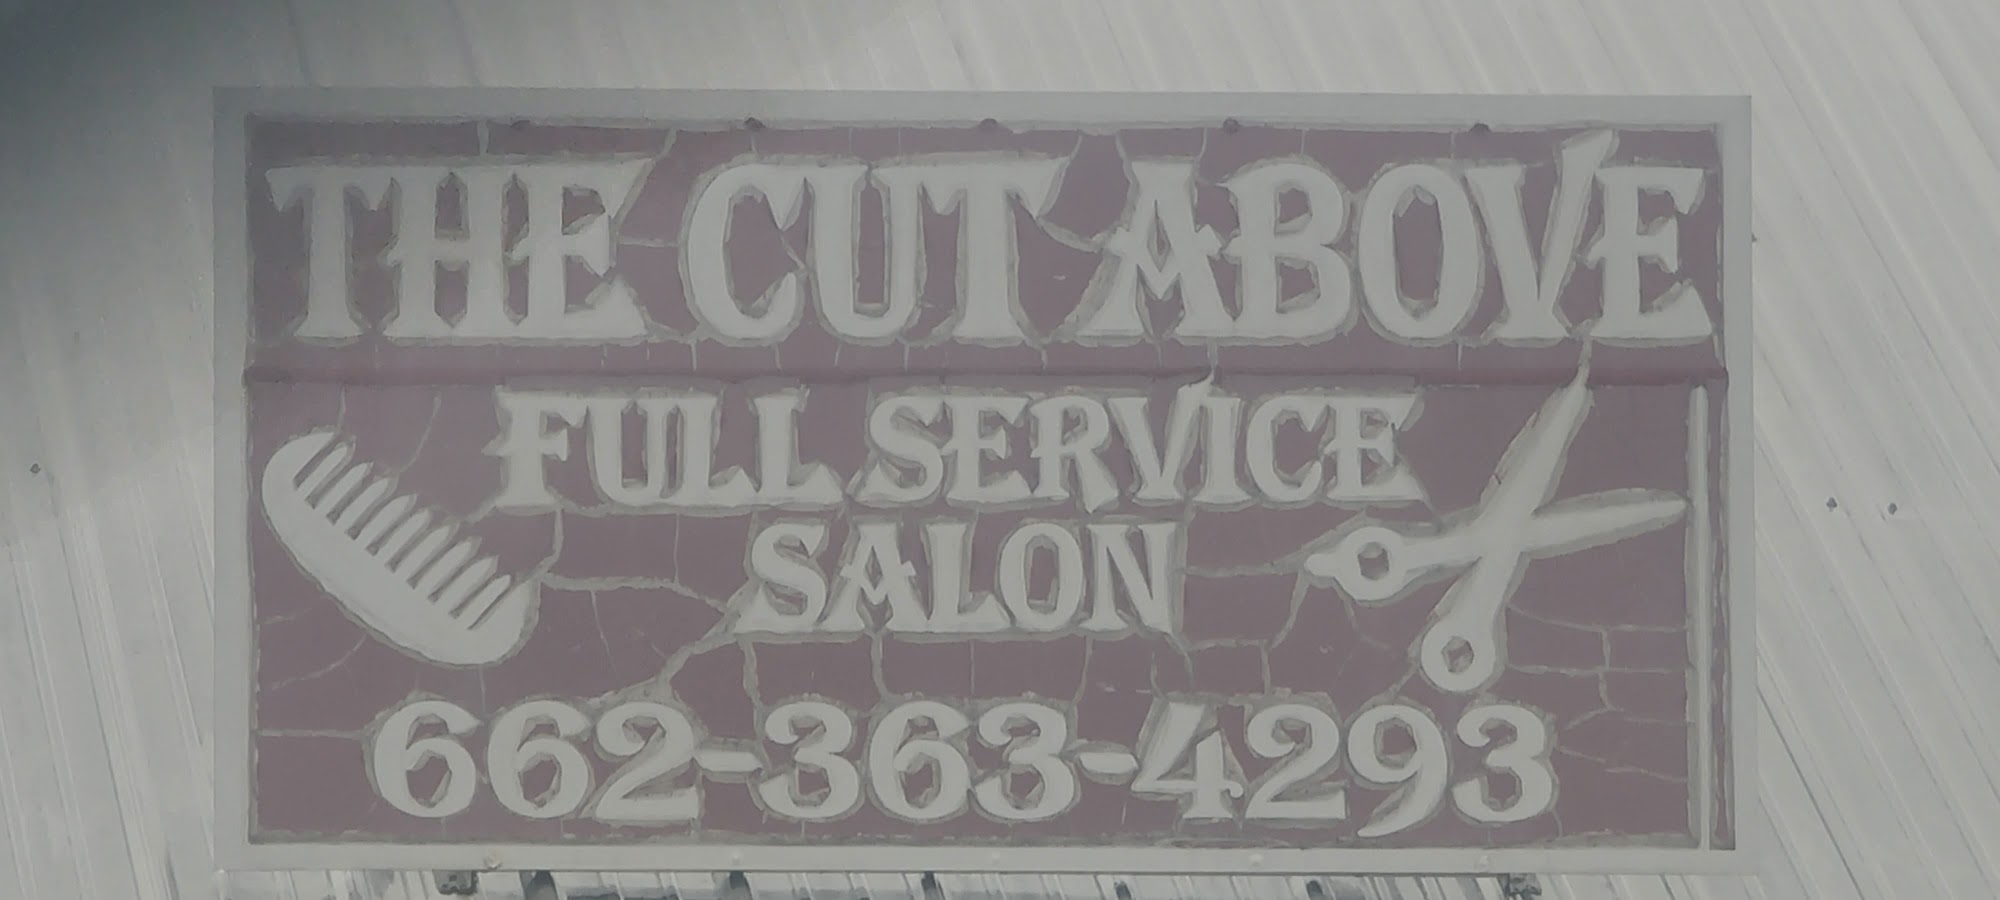 A Cut Above 863 River Rd, Tunica Mississippi 38676